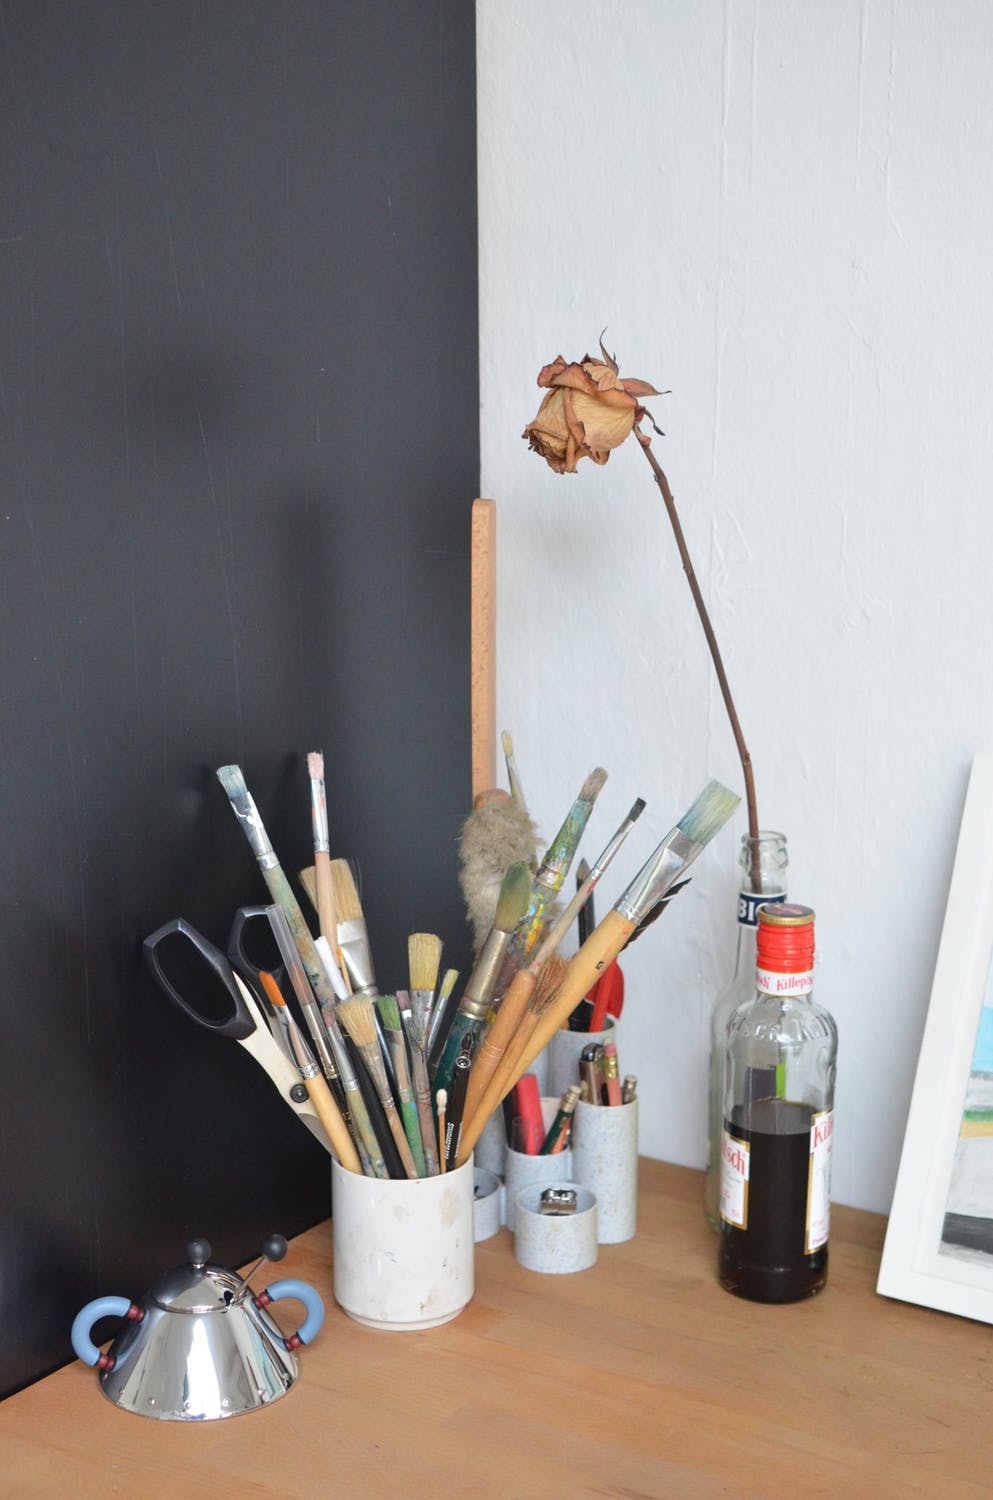 5 Ideas To Get Out Of An Art Block